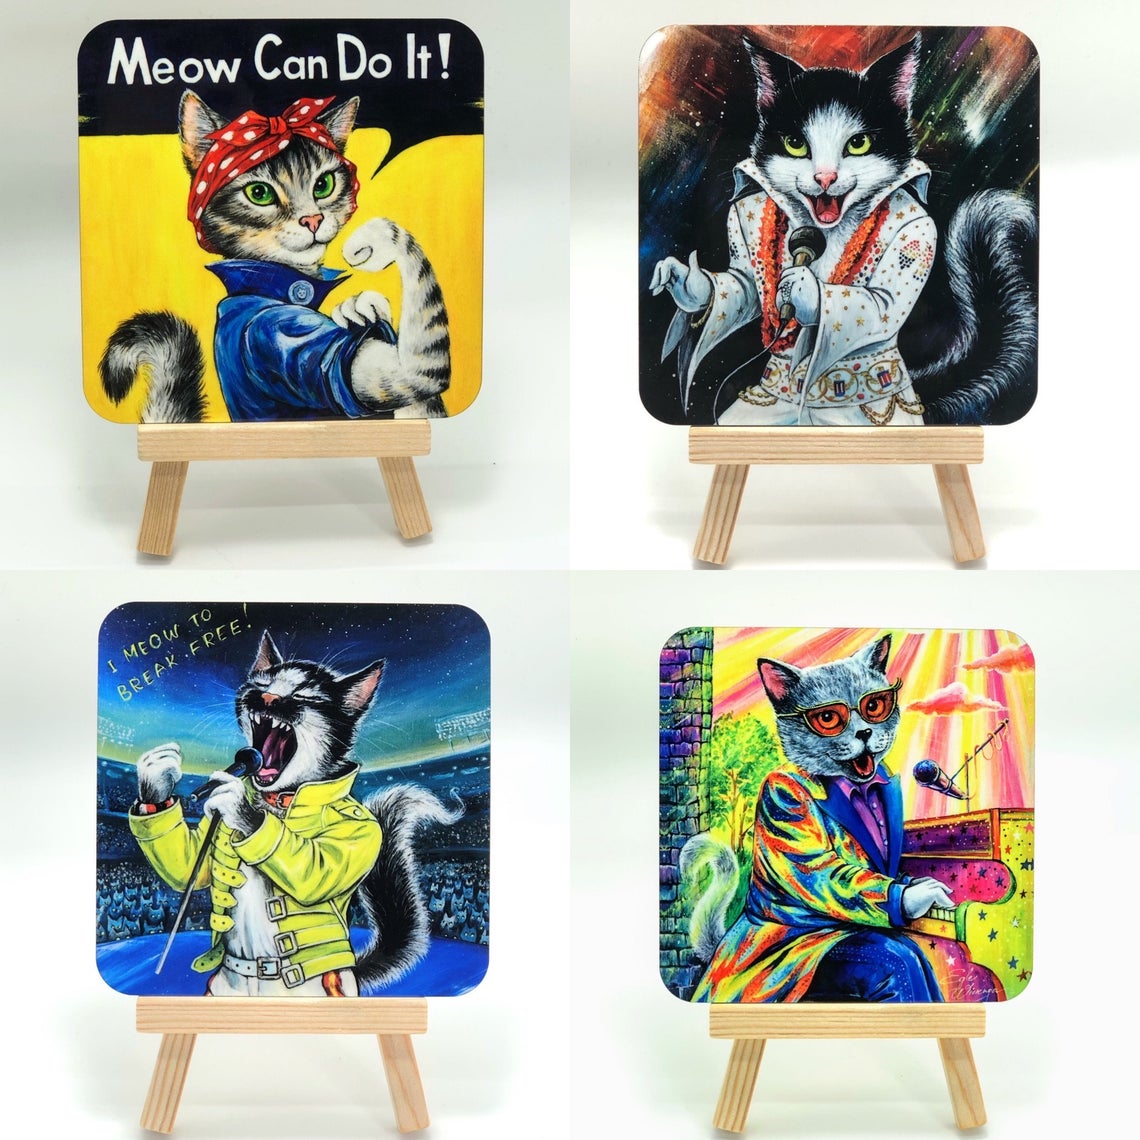 COASTERS SINGLES, Images of your choice! See Directions below!